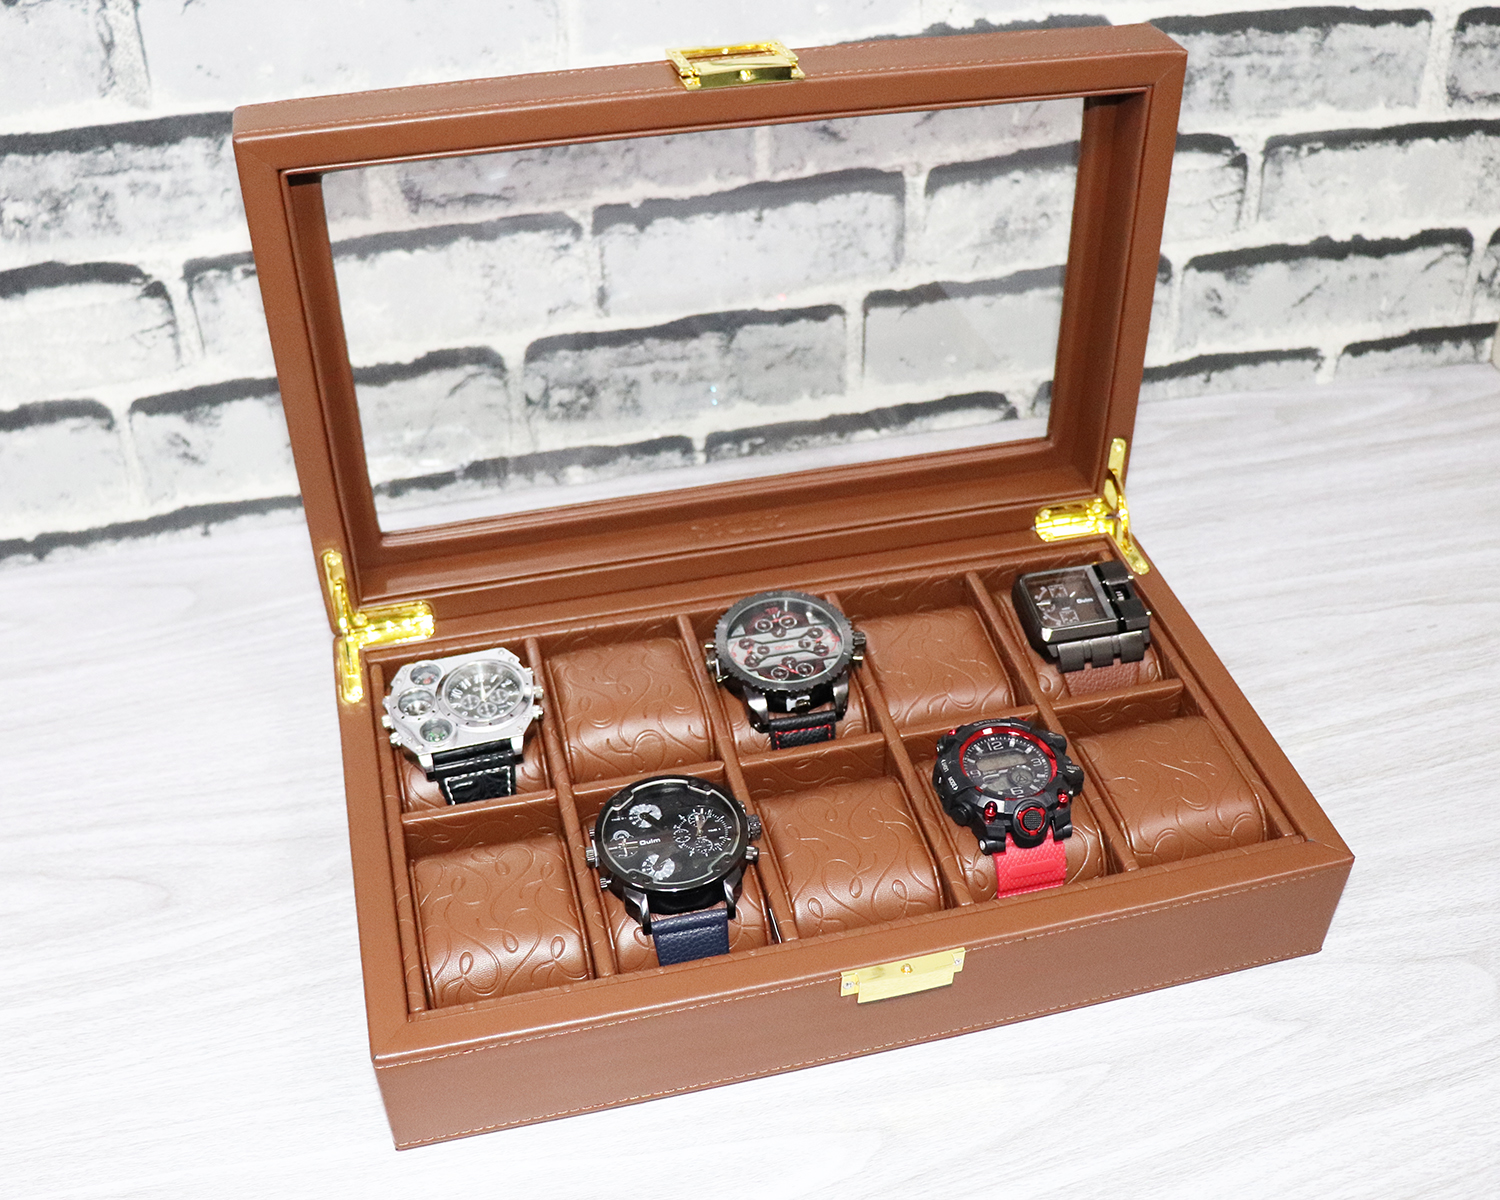 MCBZ 10 Slot Watch Box, Men's Watch Box, Suitable for 50-60mm watch storage box, Leather Watch Box (Brown)